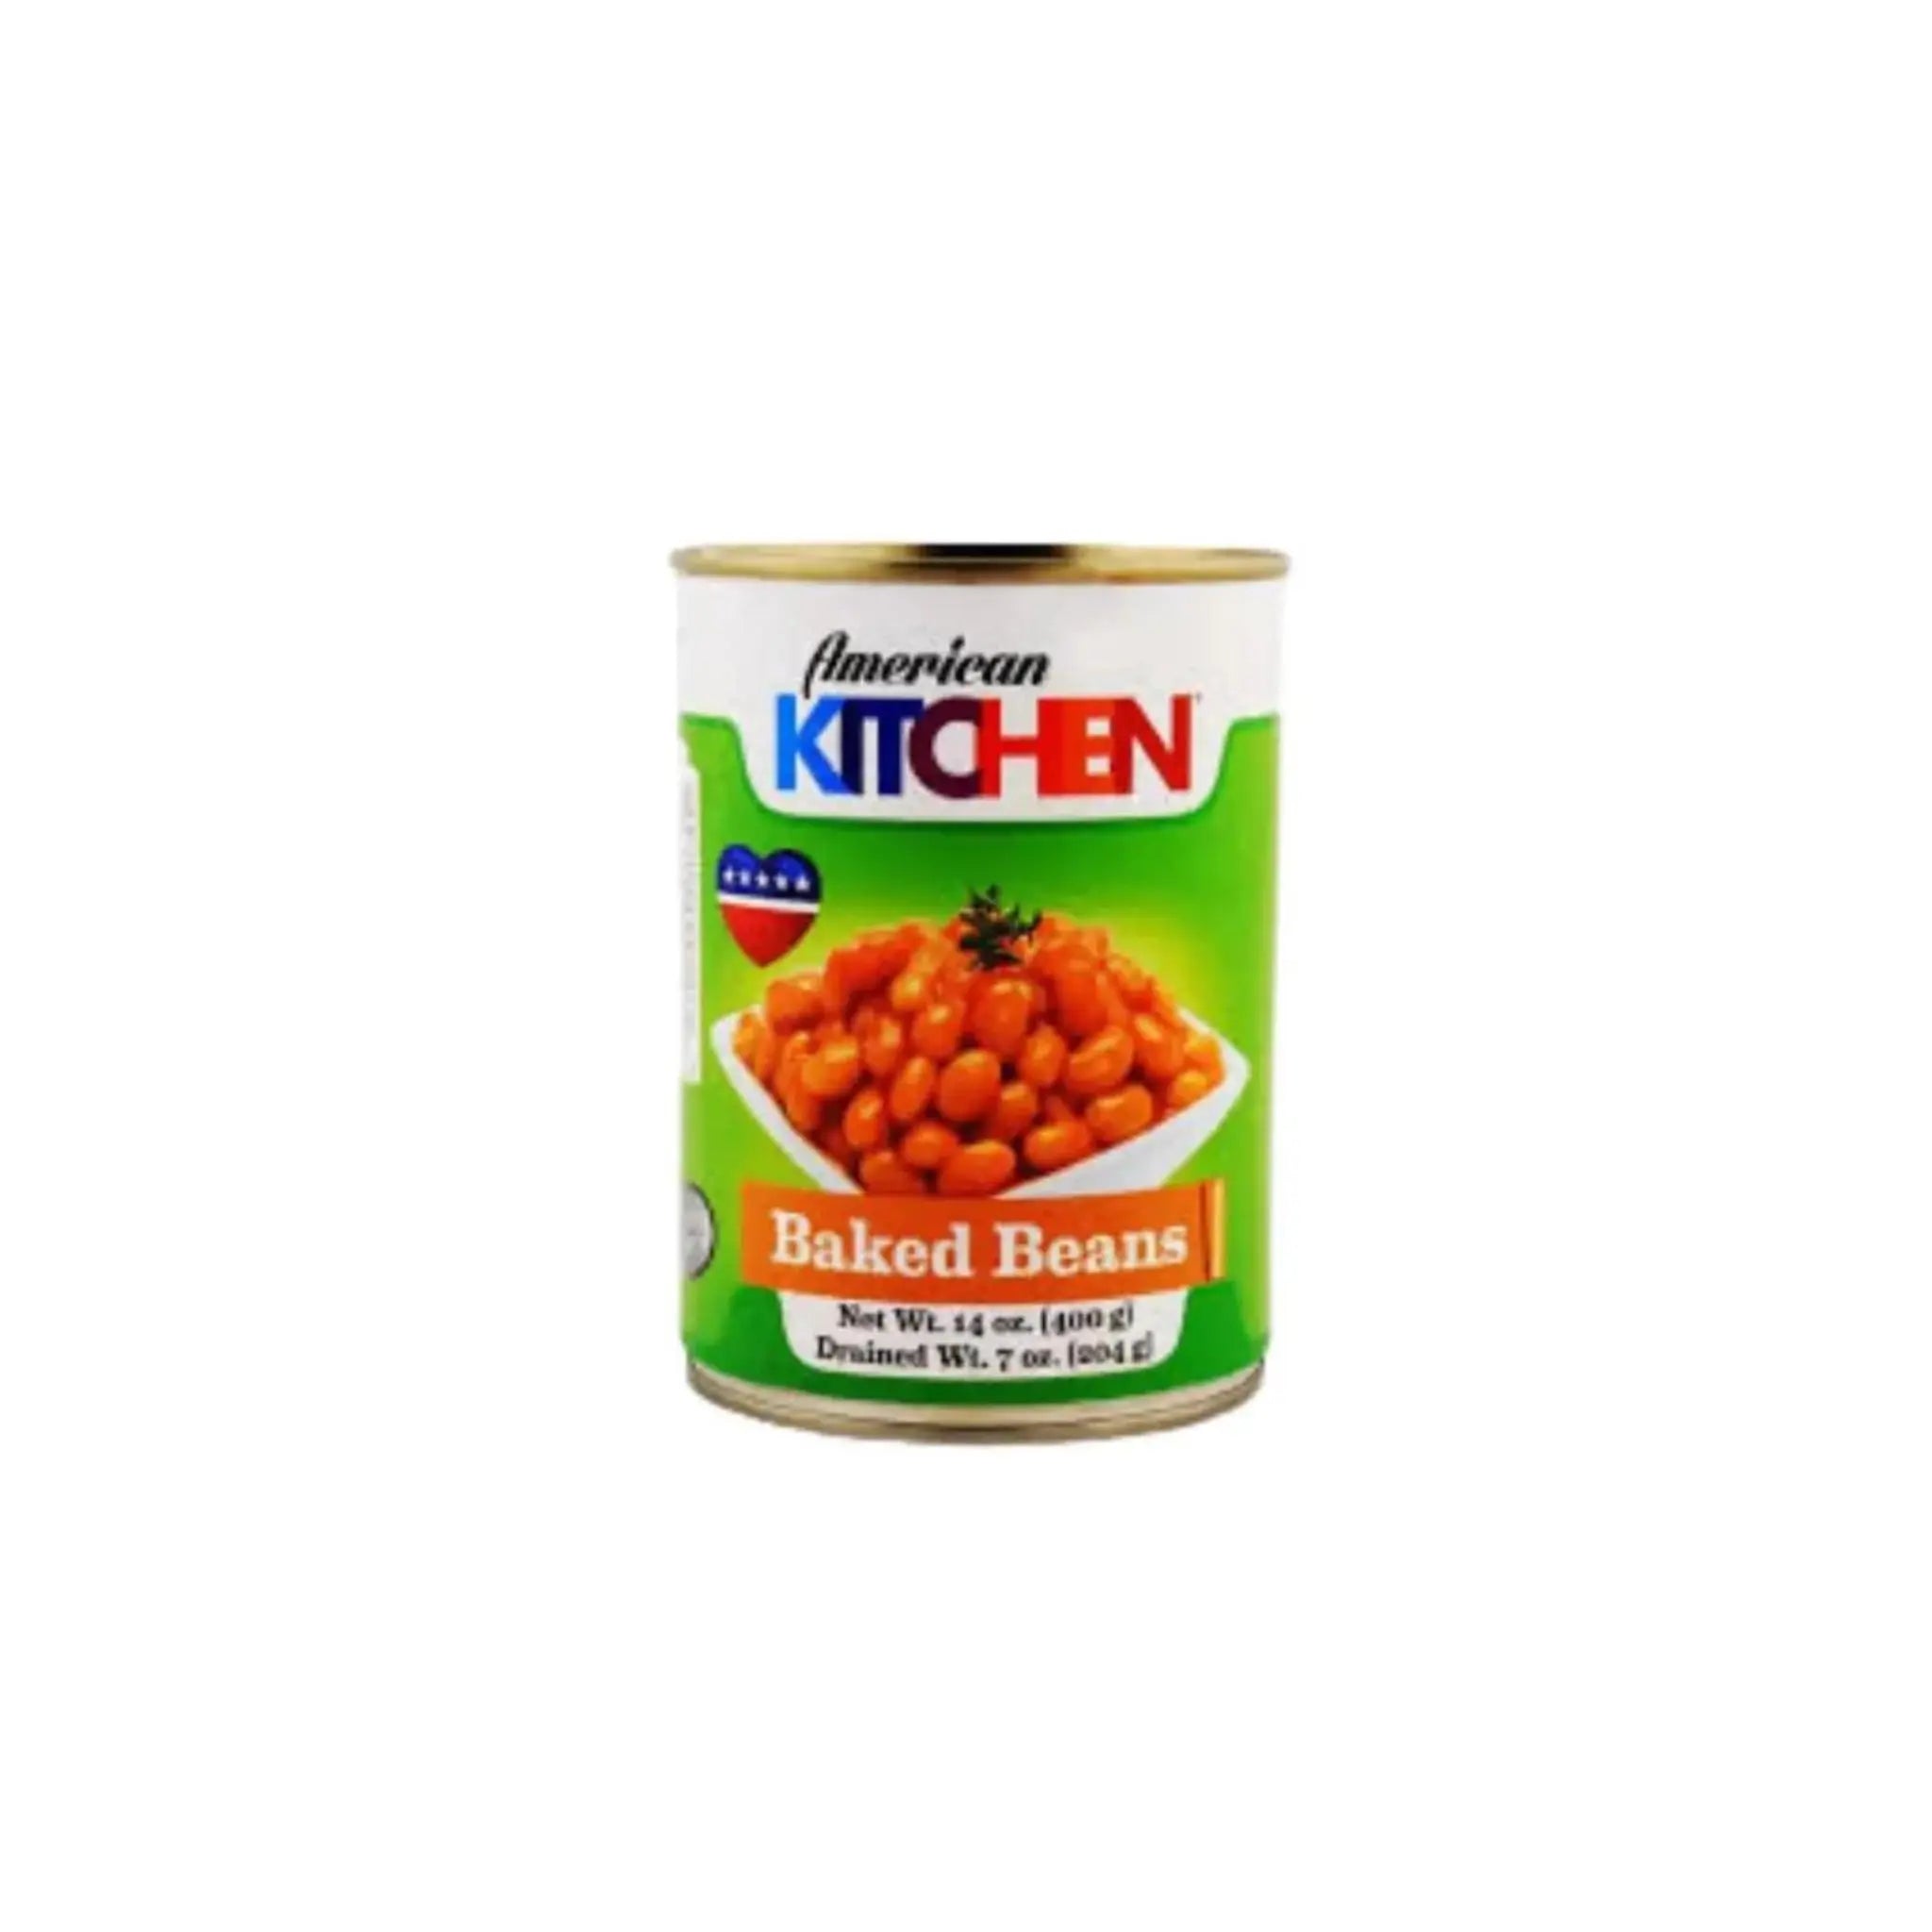 American Kitchen Baked Beans In Tomato Sauce 24X400 Gm American Kitchen